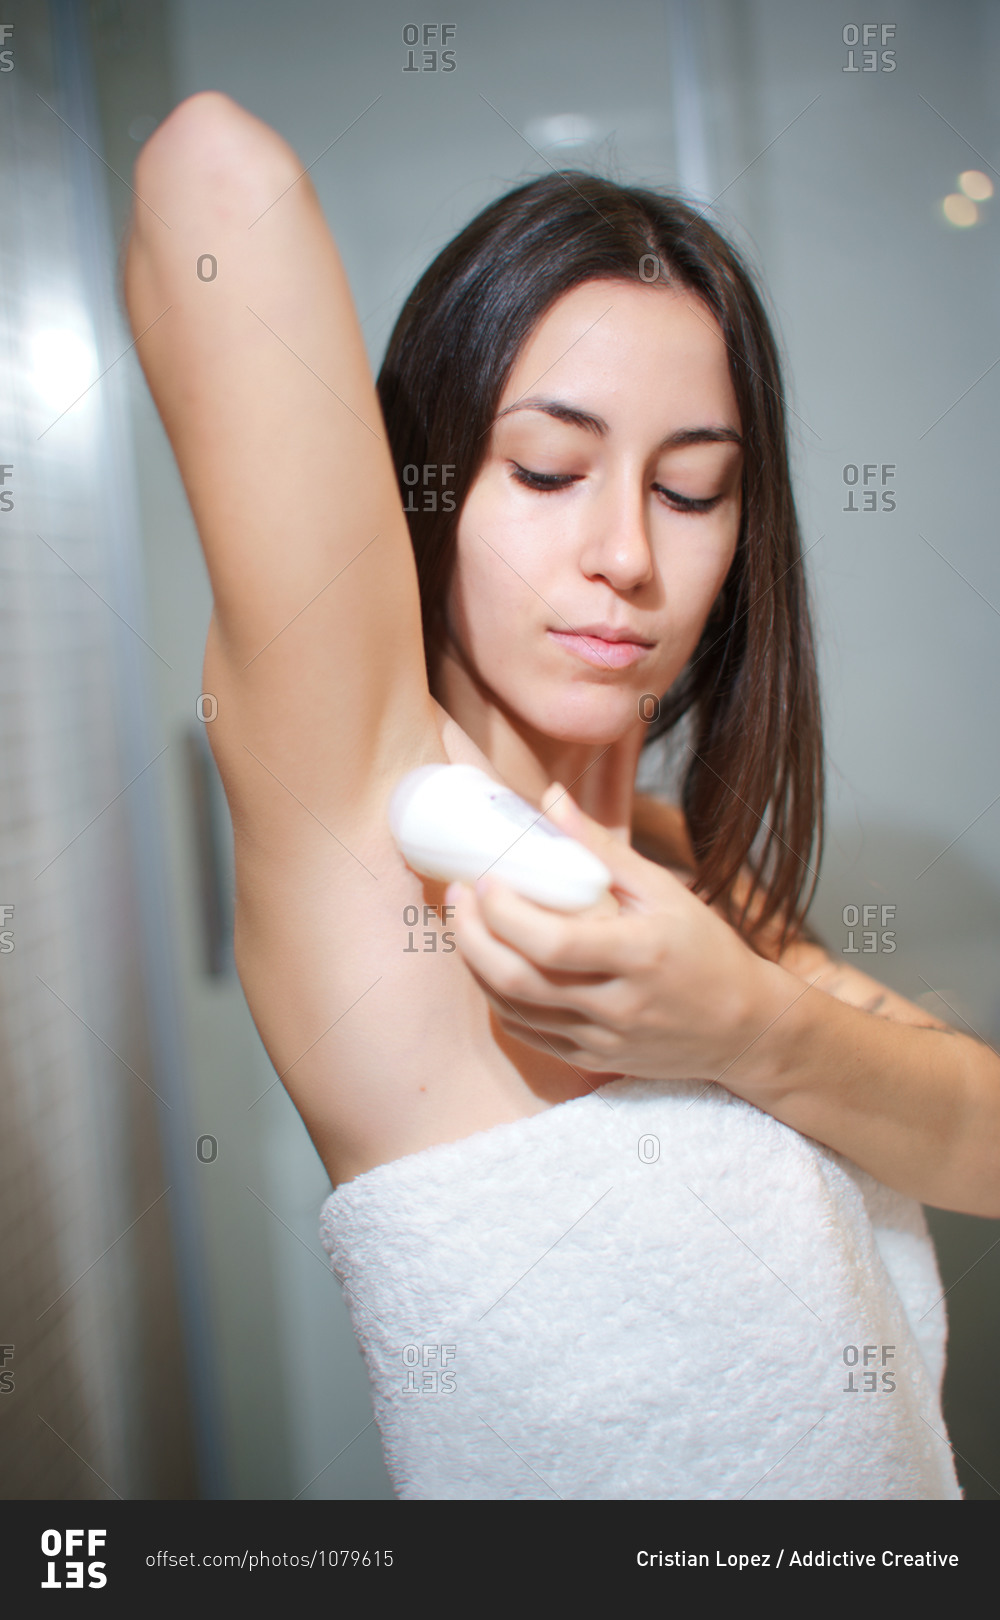 Side view of delicate female in towel standing in bathroom and applying antiperspirant on armpit after taking shower